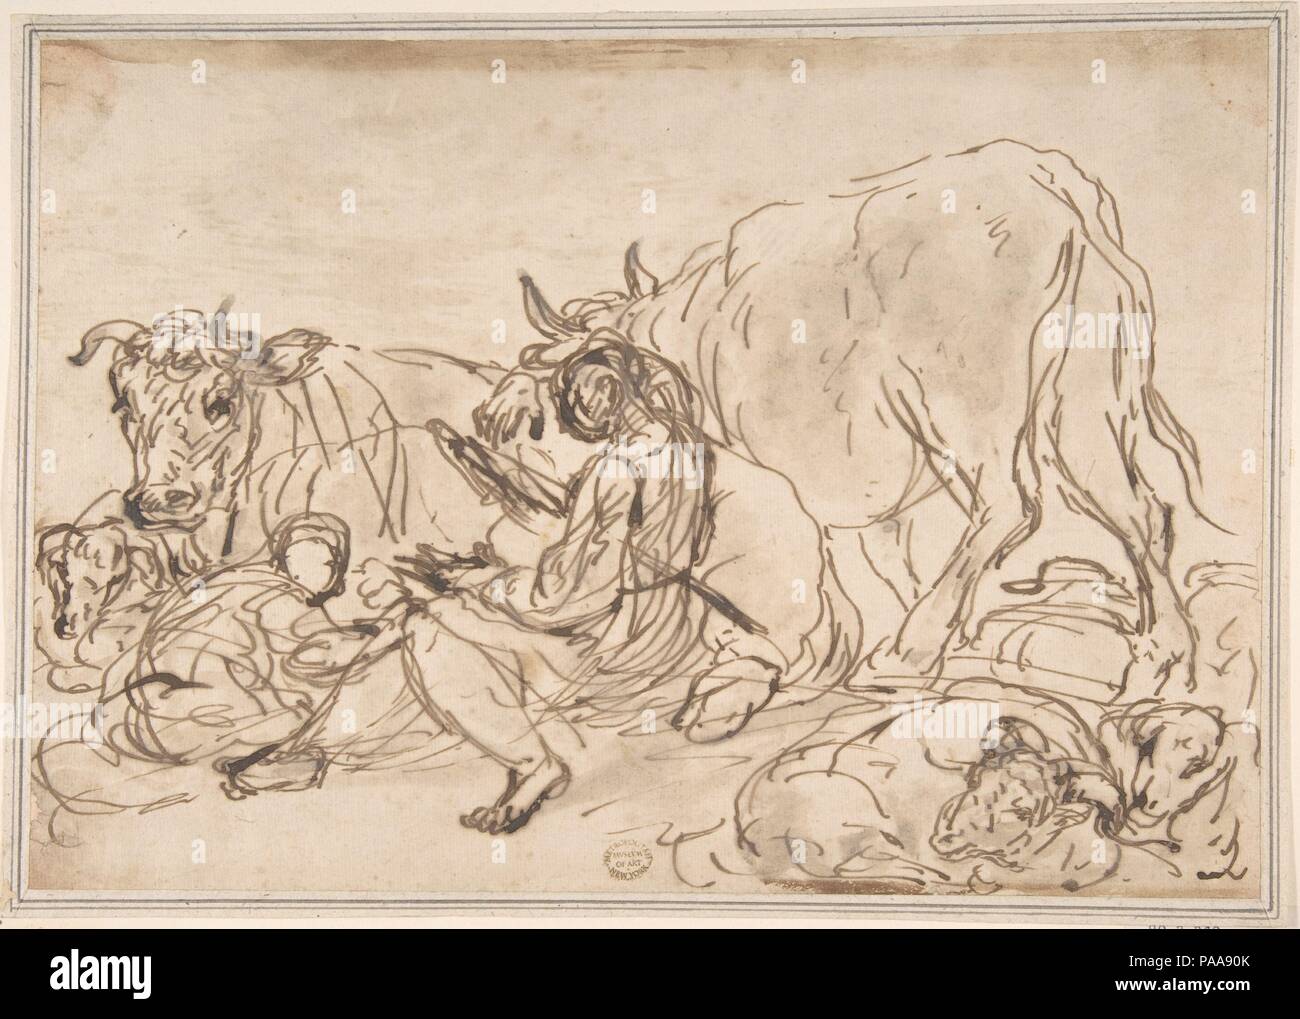 Figures with Cattle. Artist: Anonymous, Italian, Roman-Bolognese, 17th century. Dimensions: 8 x 11- 9/16 in.  (20.3 x 29.4 cm). Date: 17th century. Museum: Metropolitan Museum of Art, New York, USA. Stock Photo